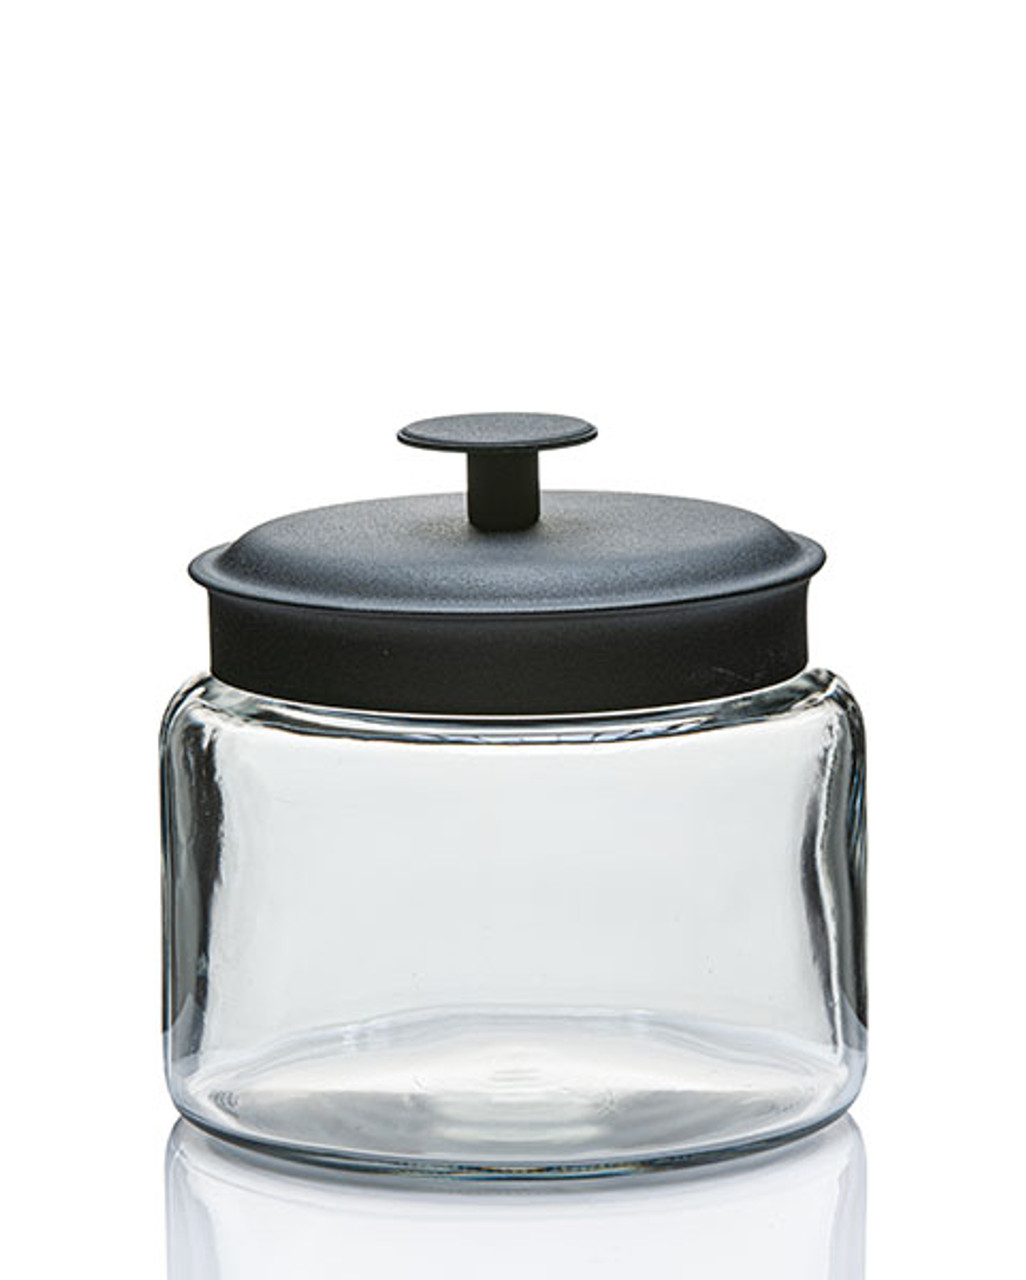 https://cdn11.bigcommerce.com/s-znjh1s2dil/images/stencil/1280x1280/products/118/389/Small-Storage-Jar-with-Black-Lid-AH96710-4__68940.1675723871.jpg?c=1